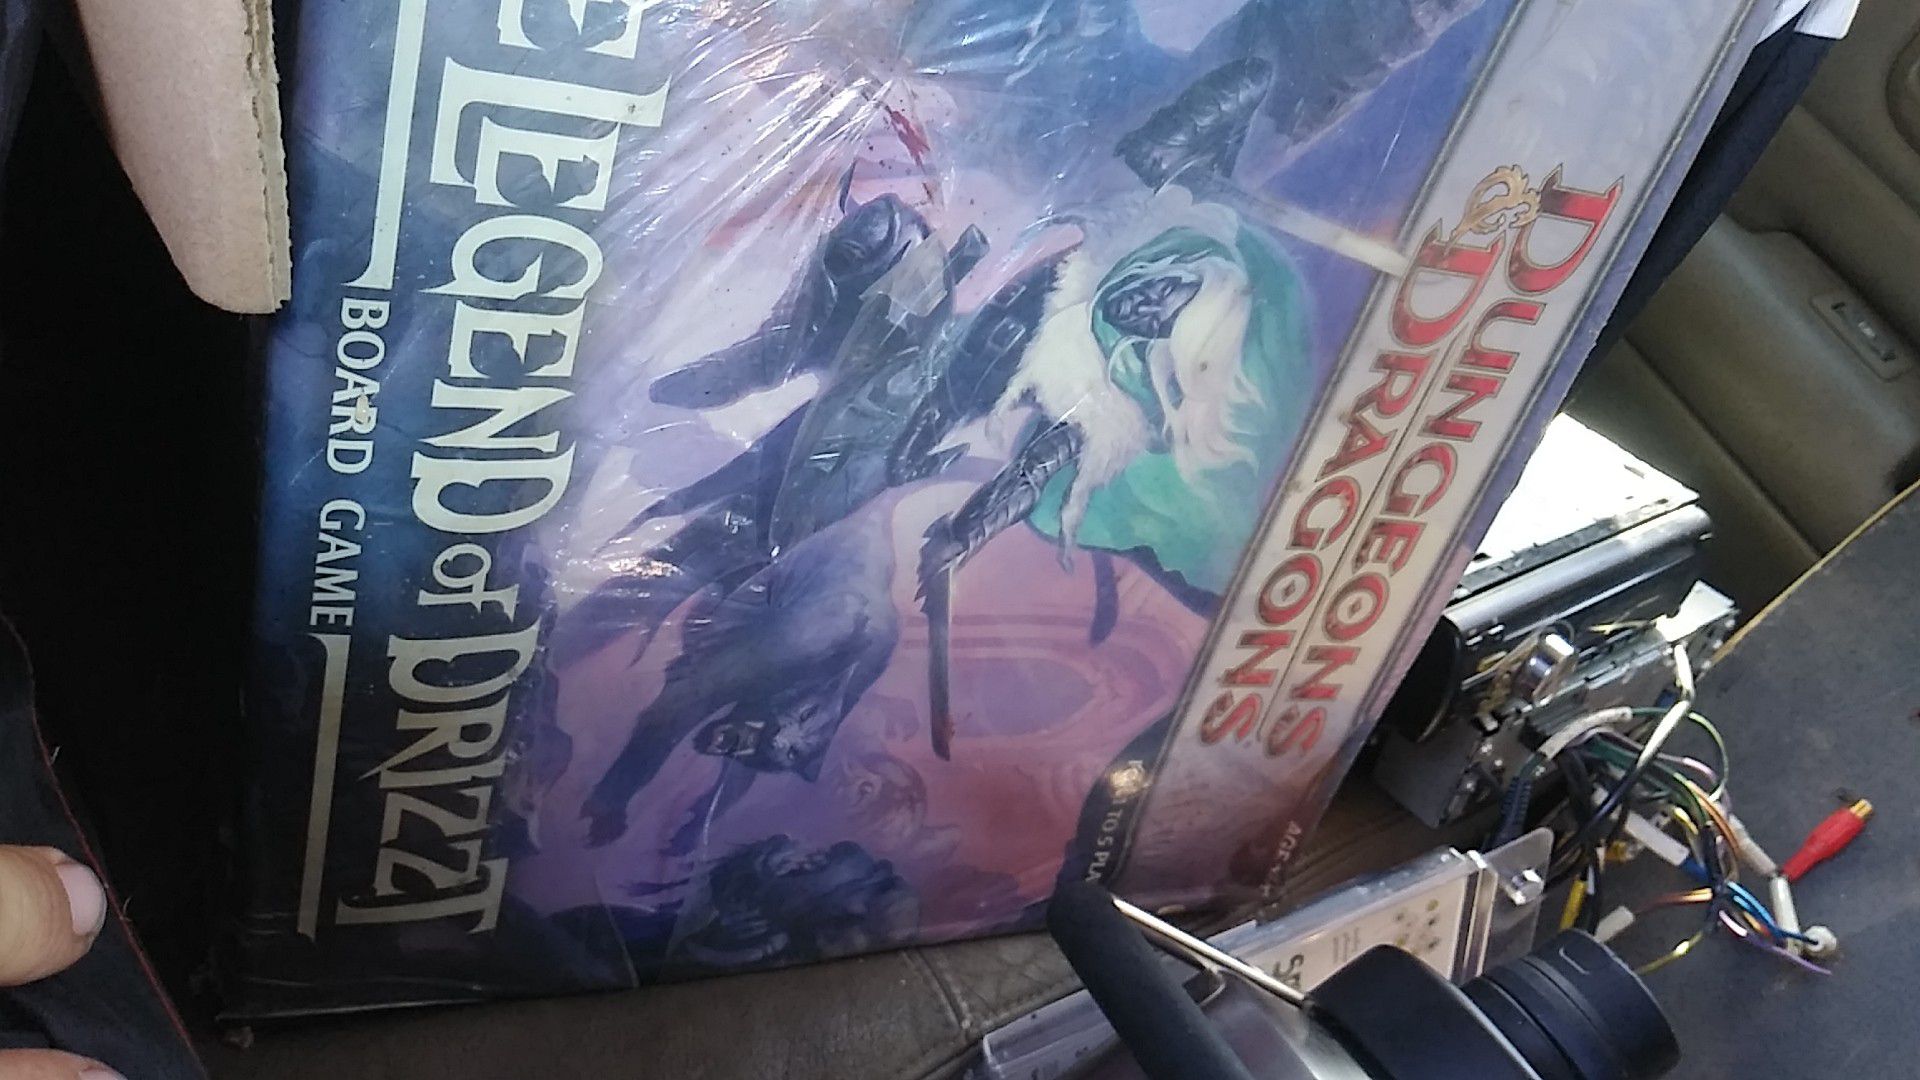 Dungeons and dragons "The Legend of Drizzt" board game